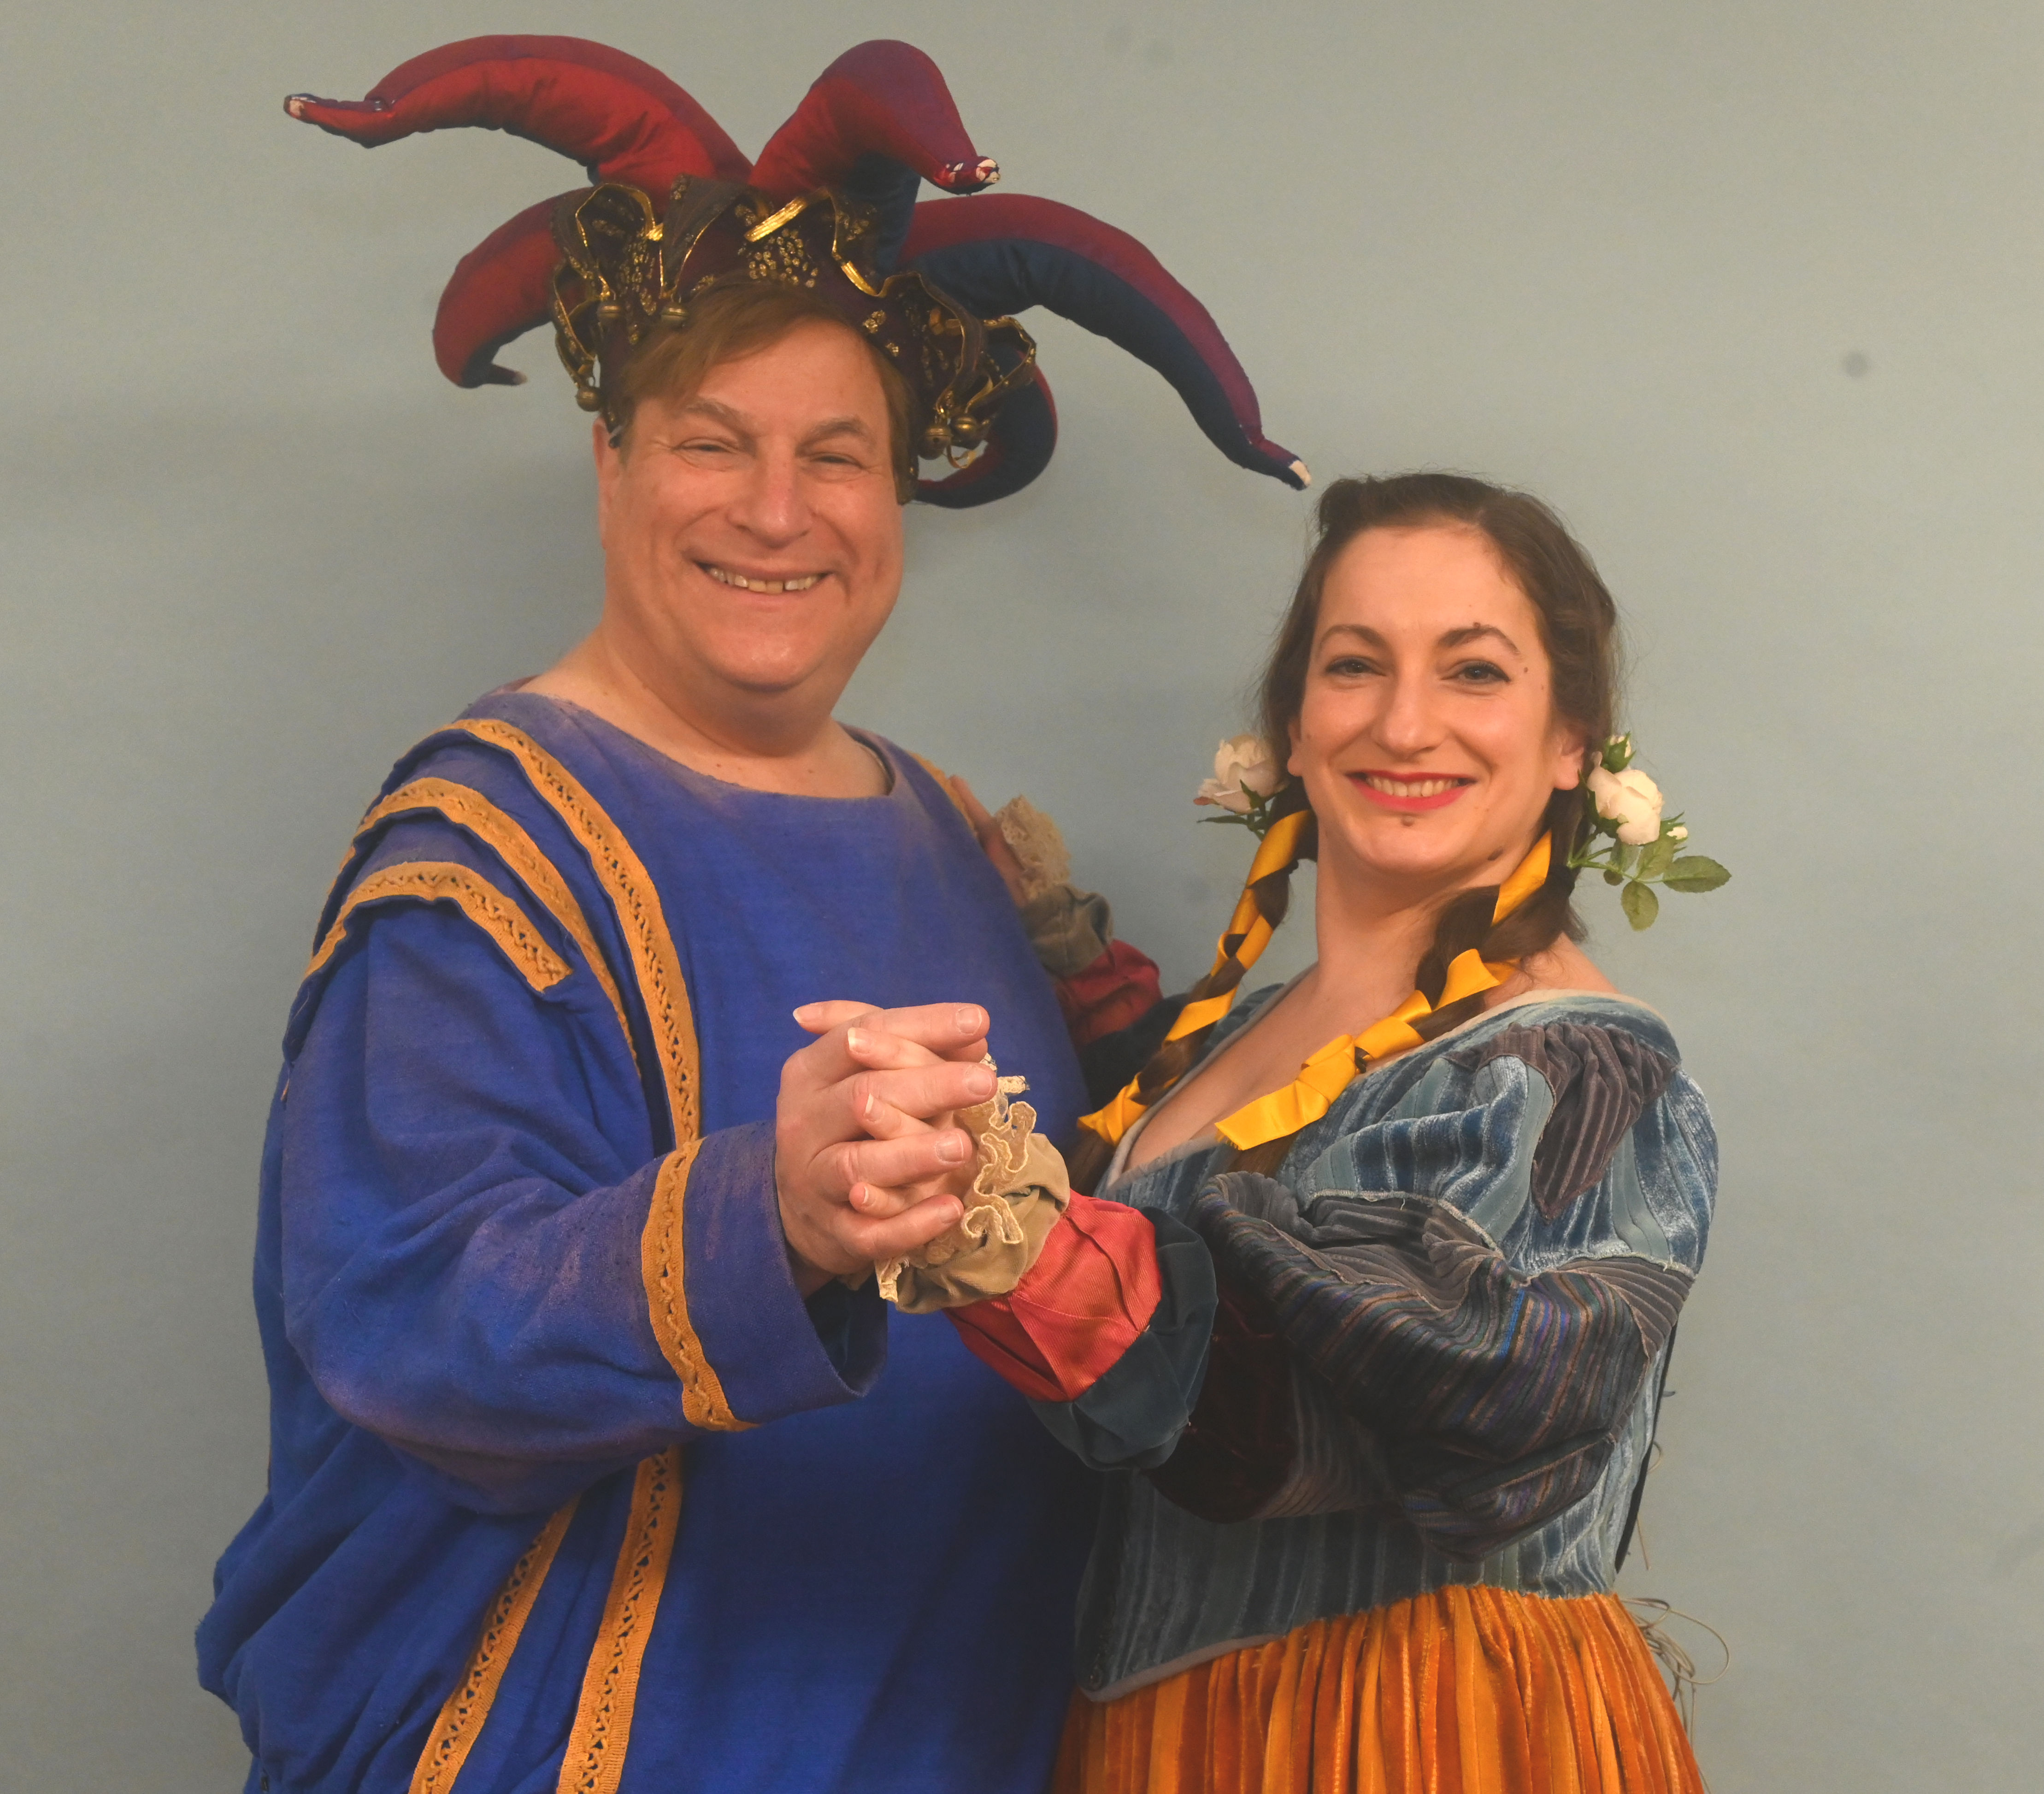 Greg Suss plays the jester Jack Point, and Christina Kampler plays Elsie, his singing partner.